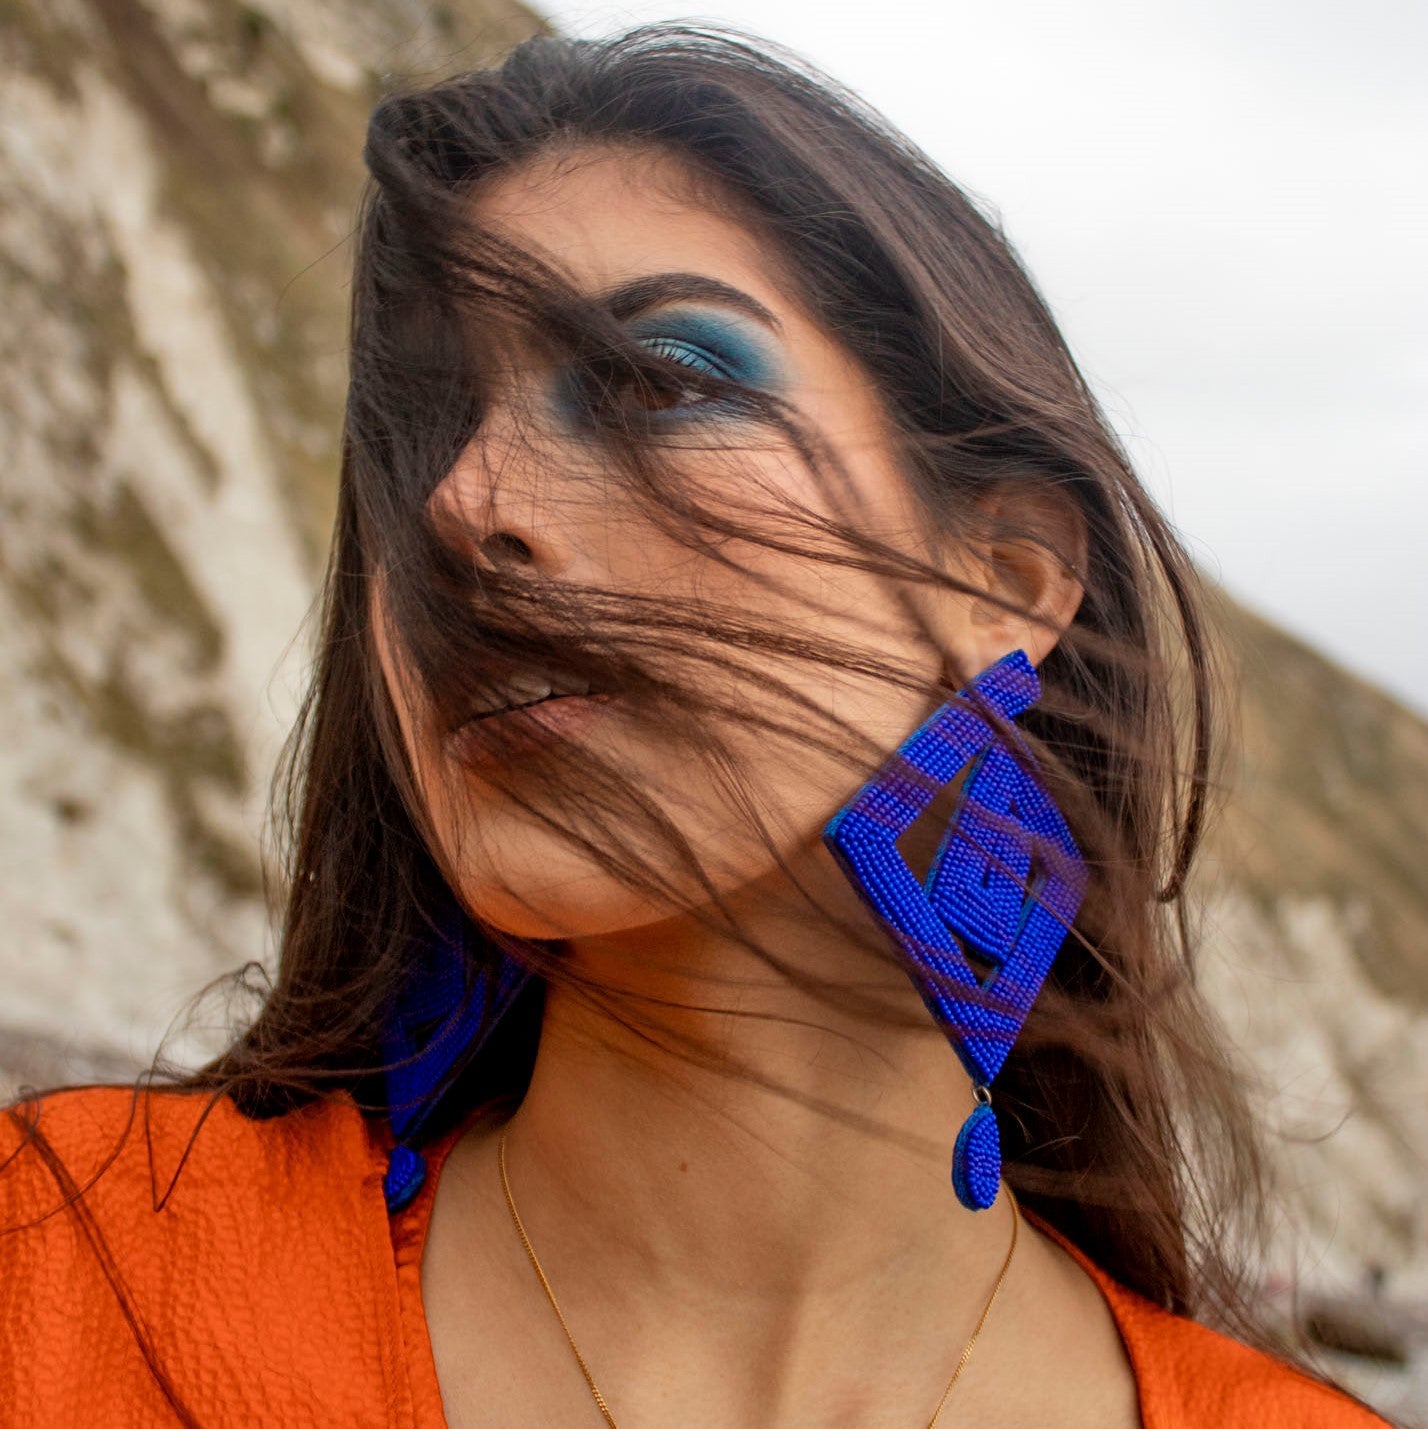 Thicc Earrings in Blue - CiceroniHypedevi